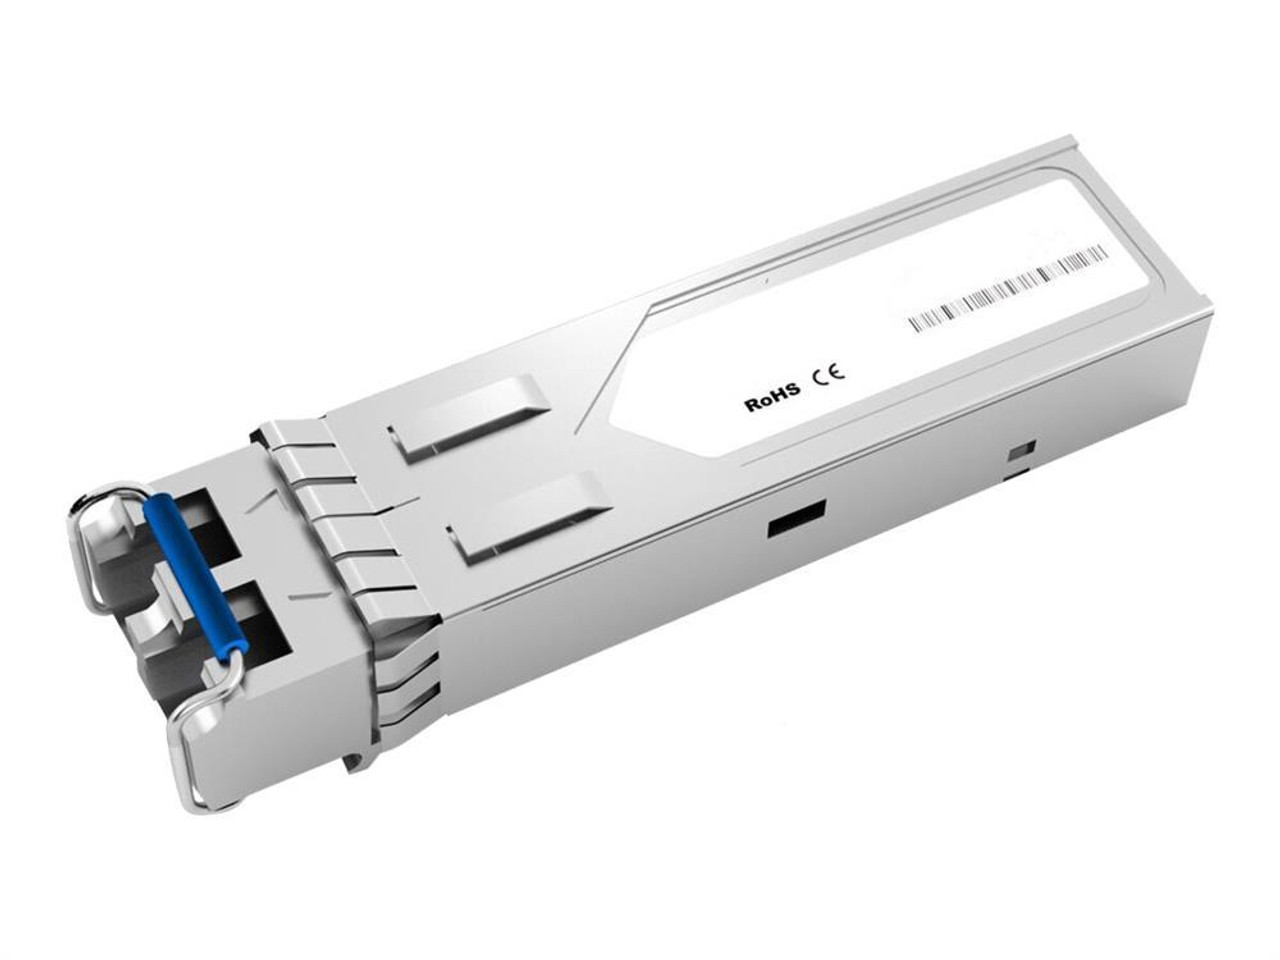 100-01666-C-ACC Accortec 1.25Gbps 1000Base-BX-U Single-mode Fiber 10km 1310nmTX/1550nmRX LC Connector SFP Transceiver Module (Commercial Temperature) for Calix